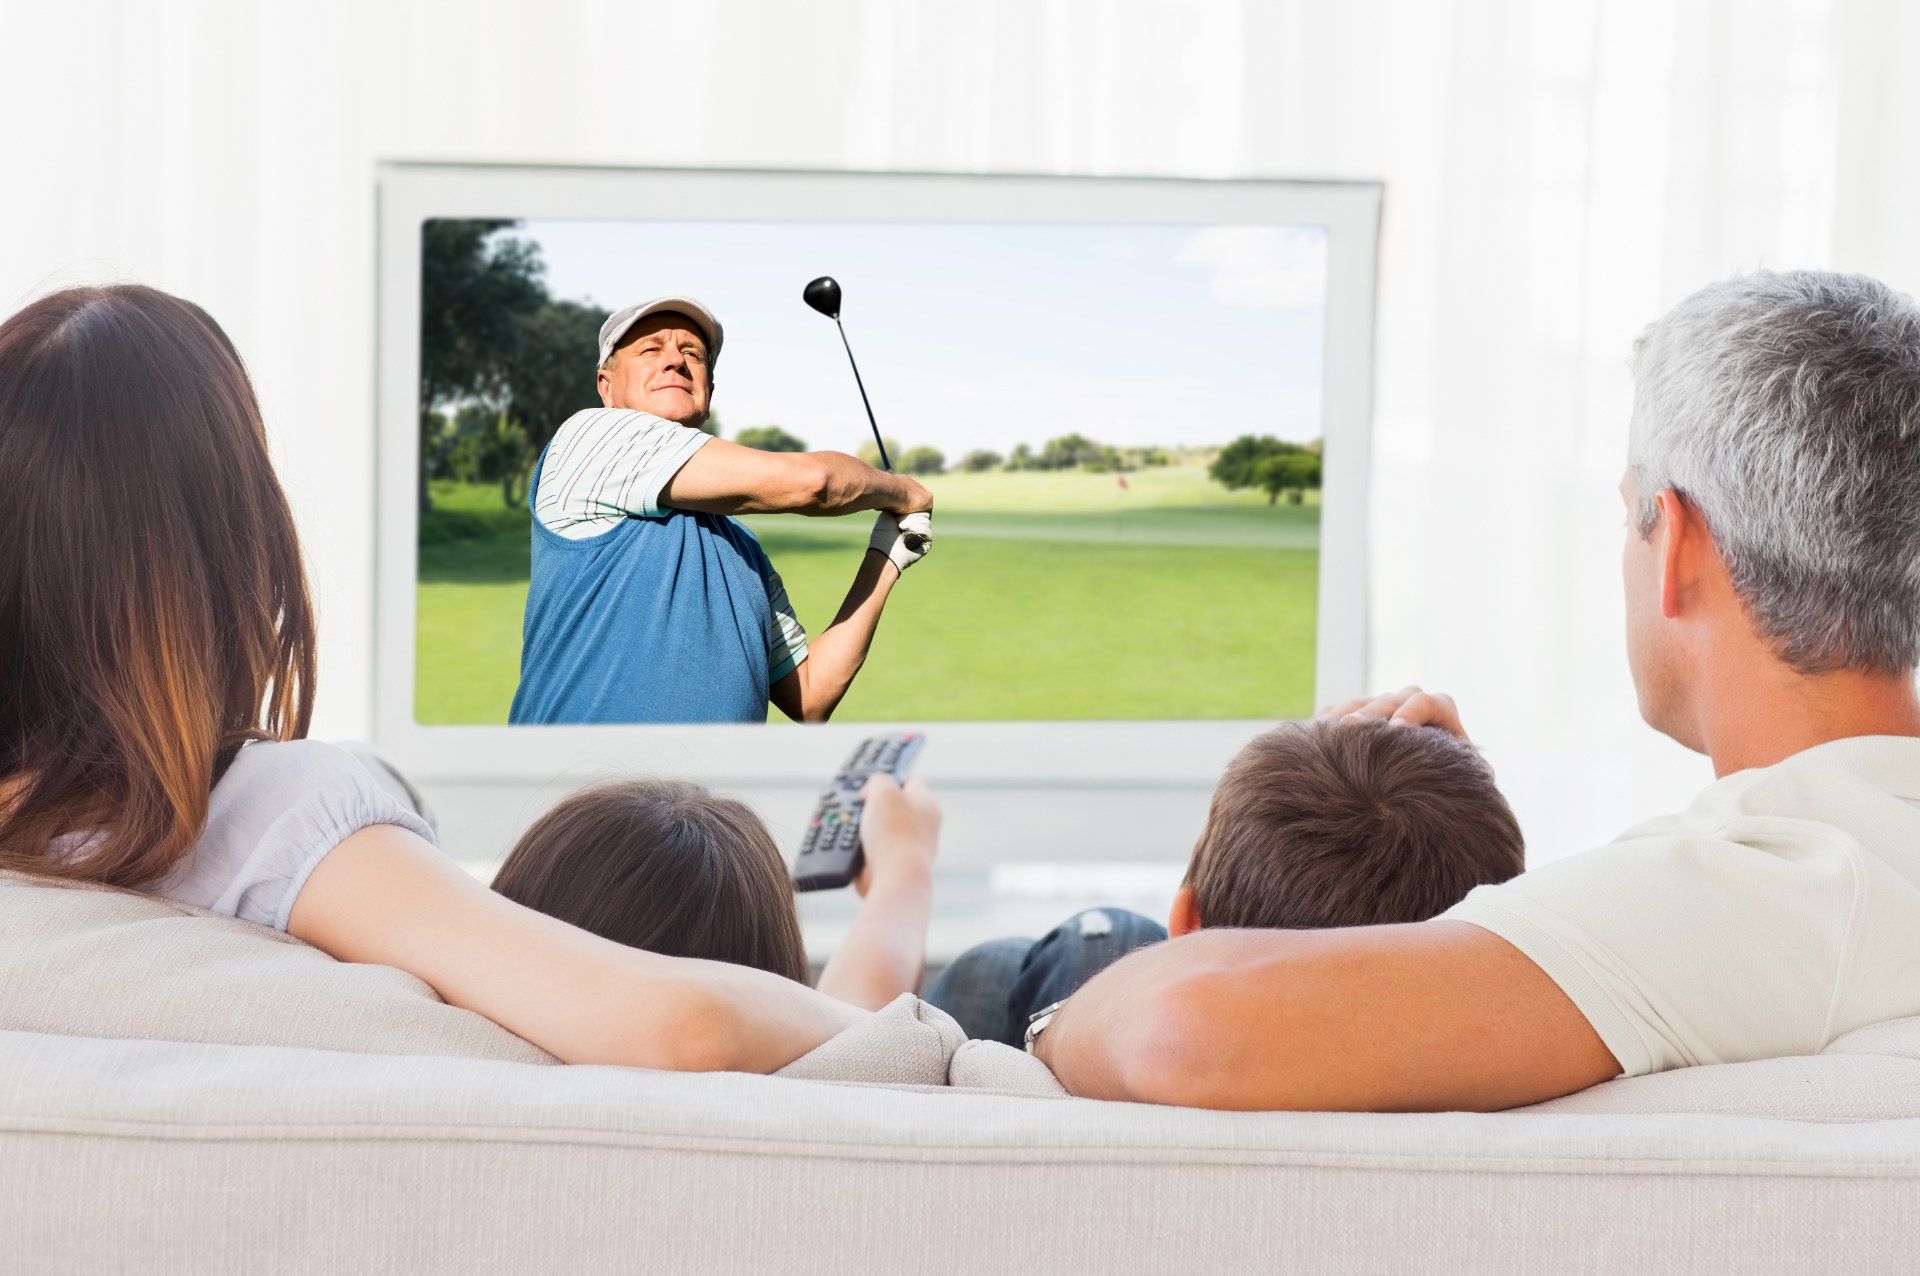 Rear shot of man and woman watching golf on TV with two children - NBCUniversal